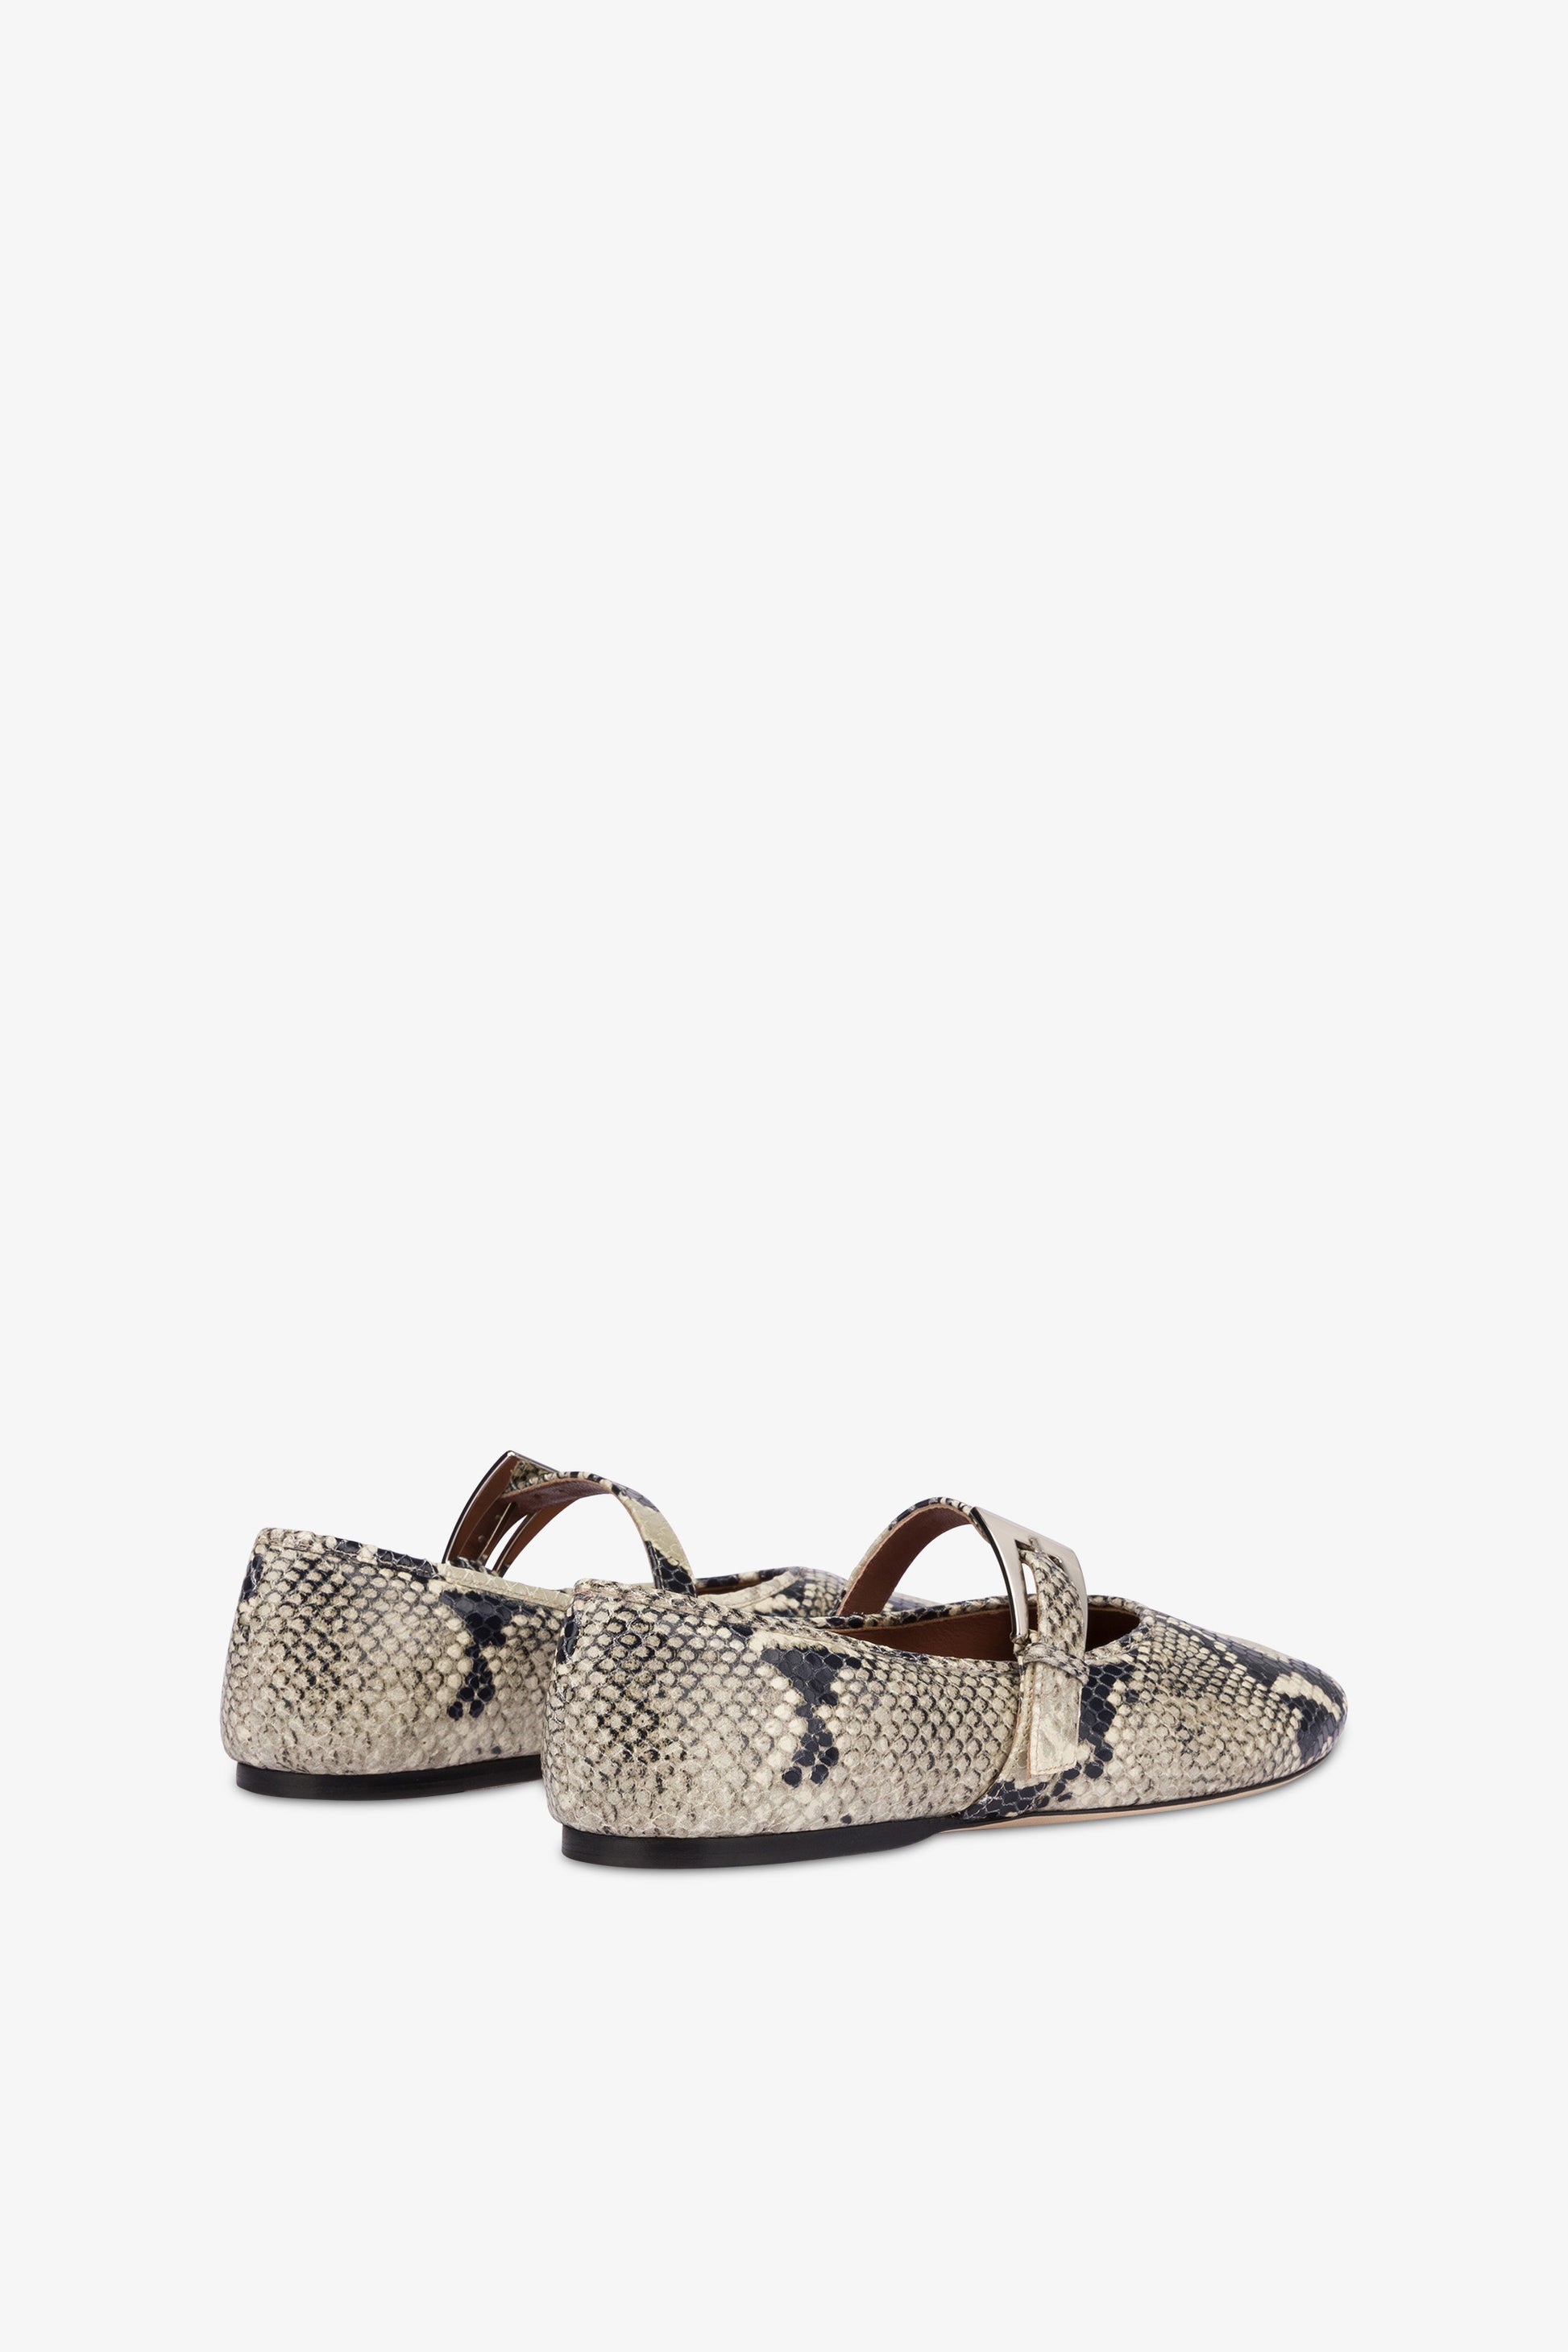 Ballet flats in natural python-printed leather